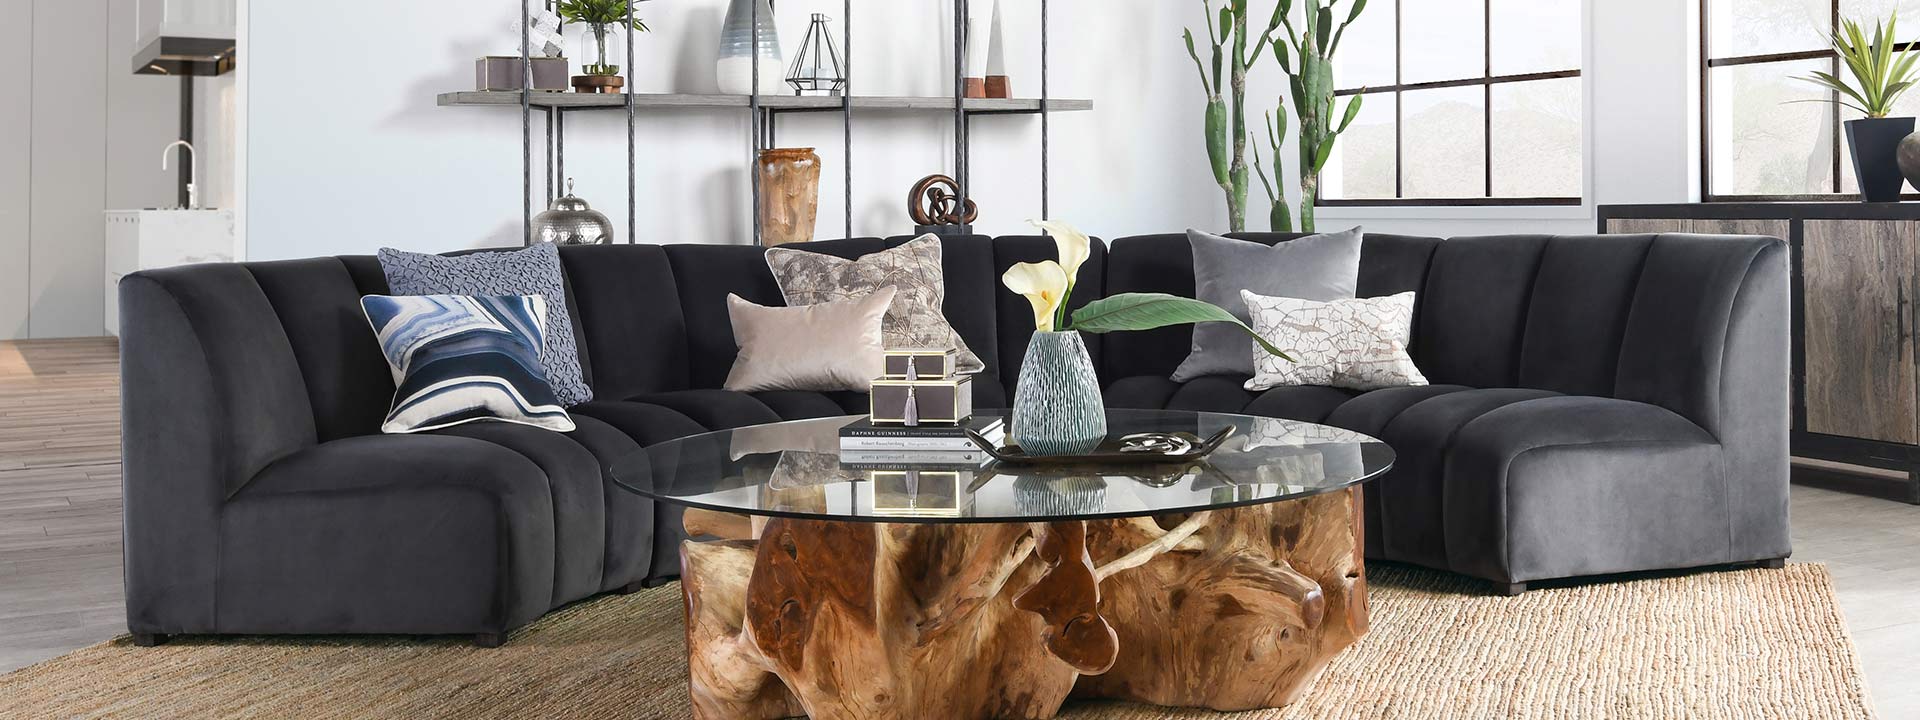 Home Decor Buying Guide